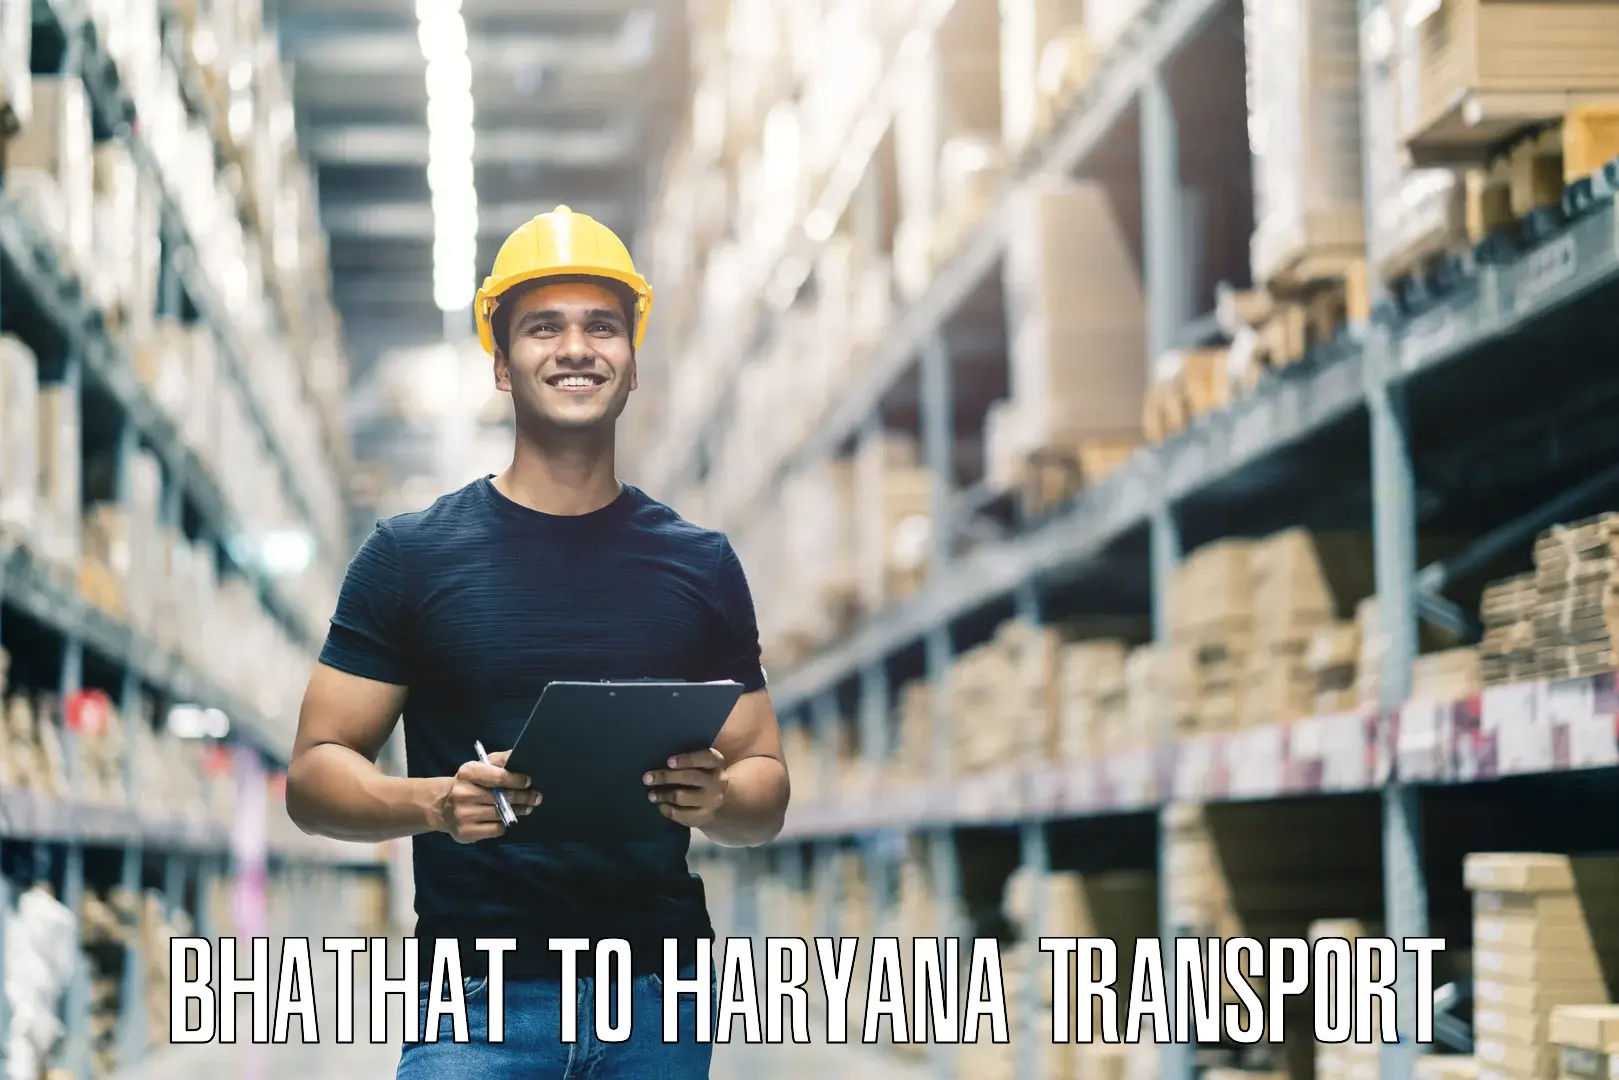 Daily transport service in Bhathat to Haryana